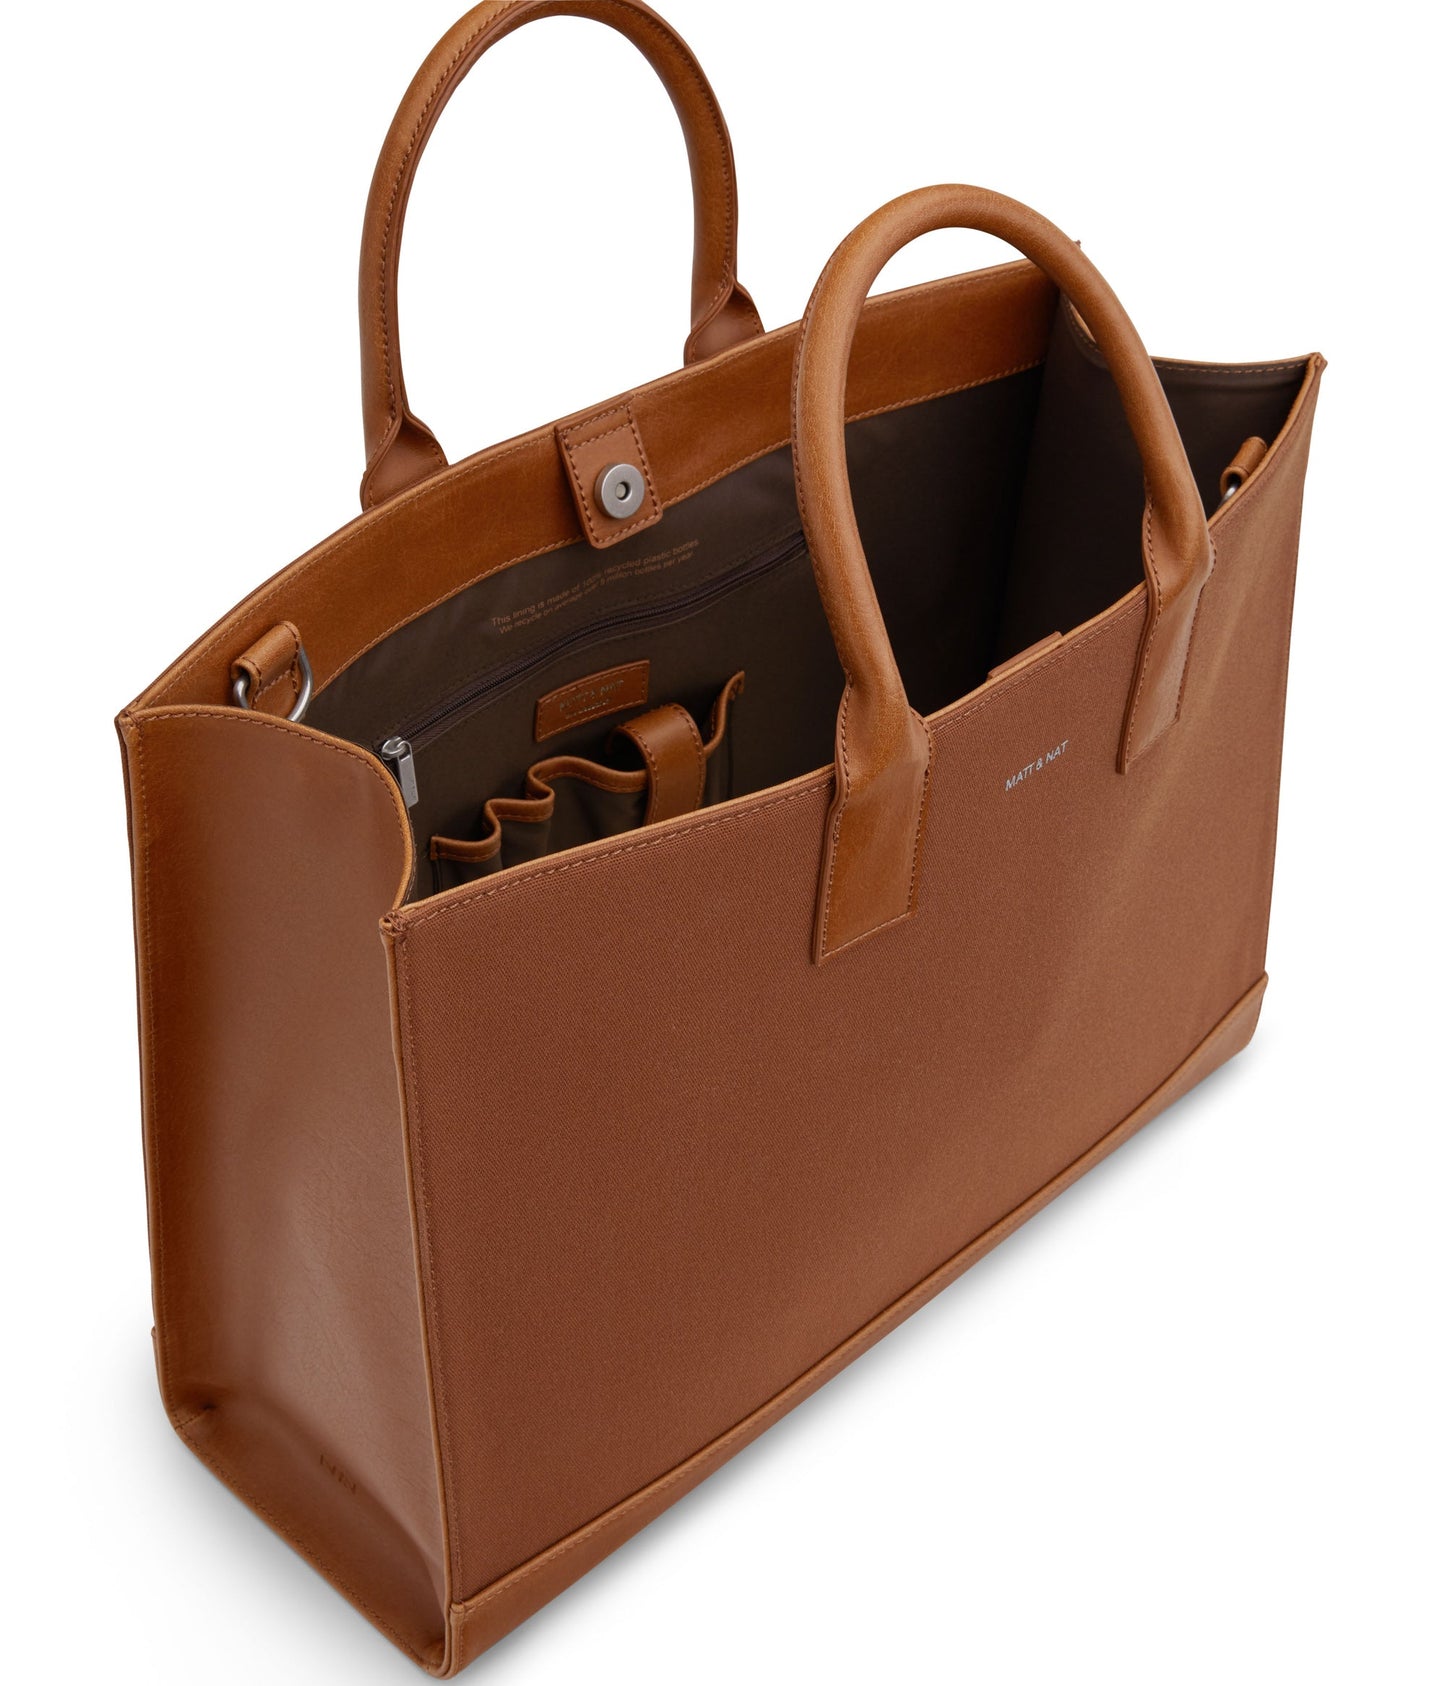 JOI Canvas Tote Bag - Canvas | Color: Brown - variant::chili